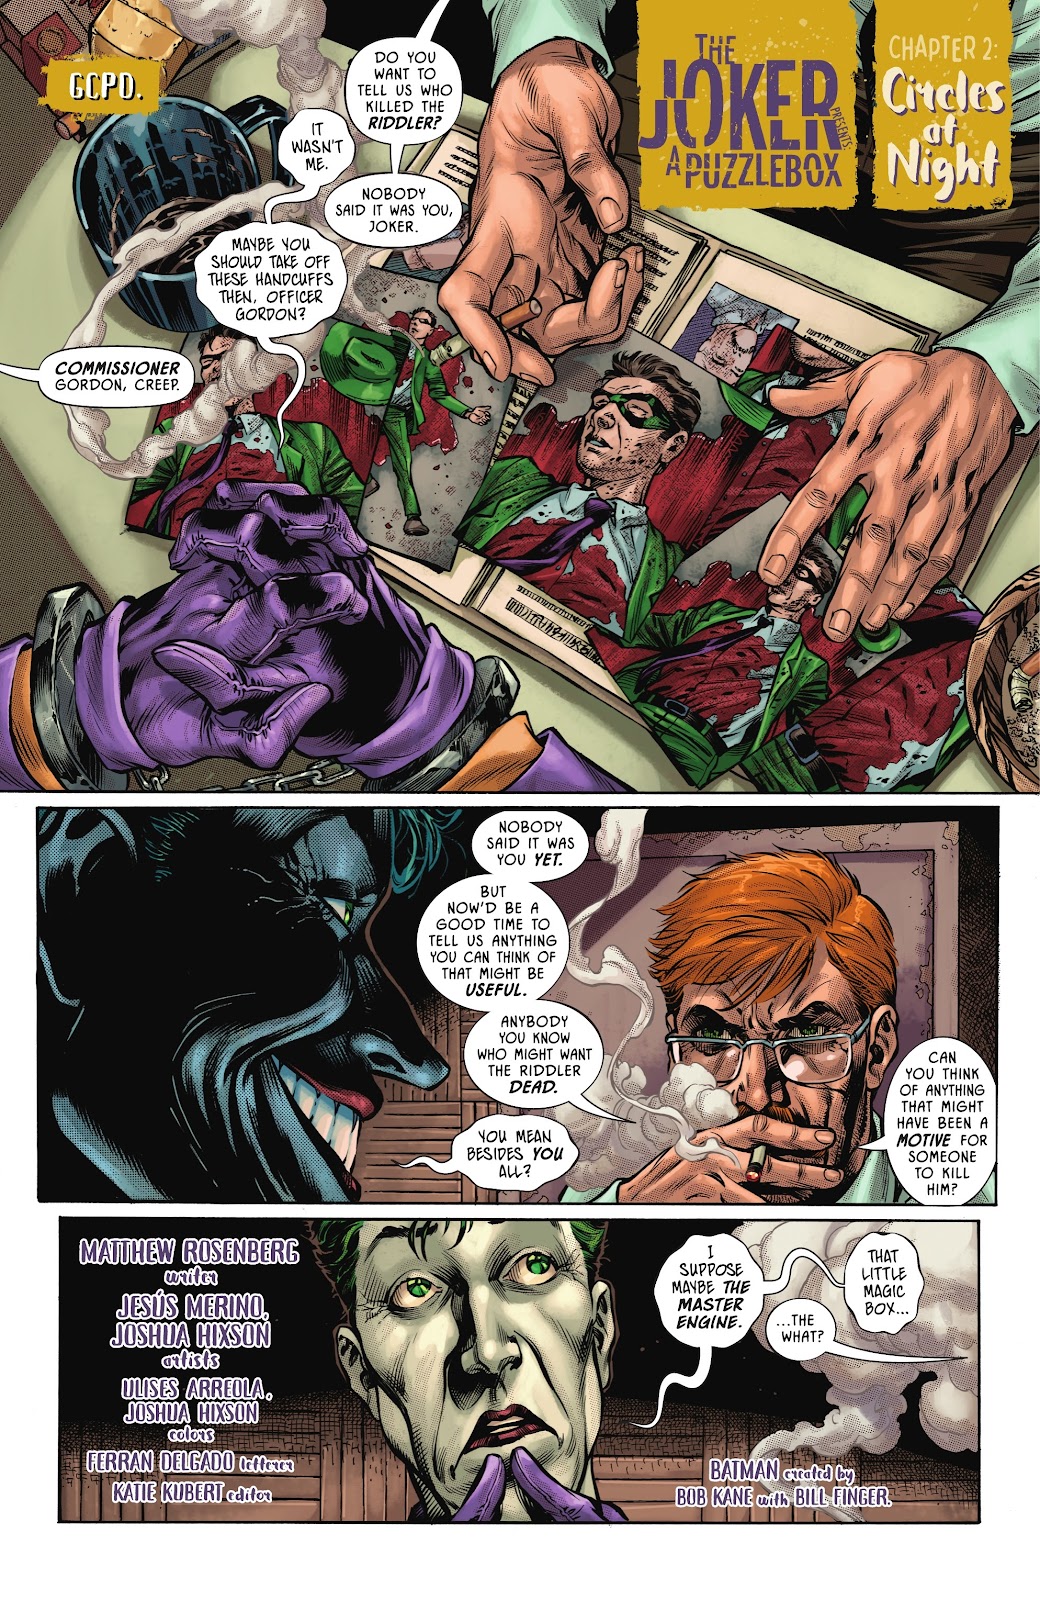 The Joker Presents: A Puzzlebox issue 2 - Page 2